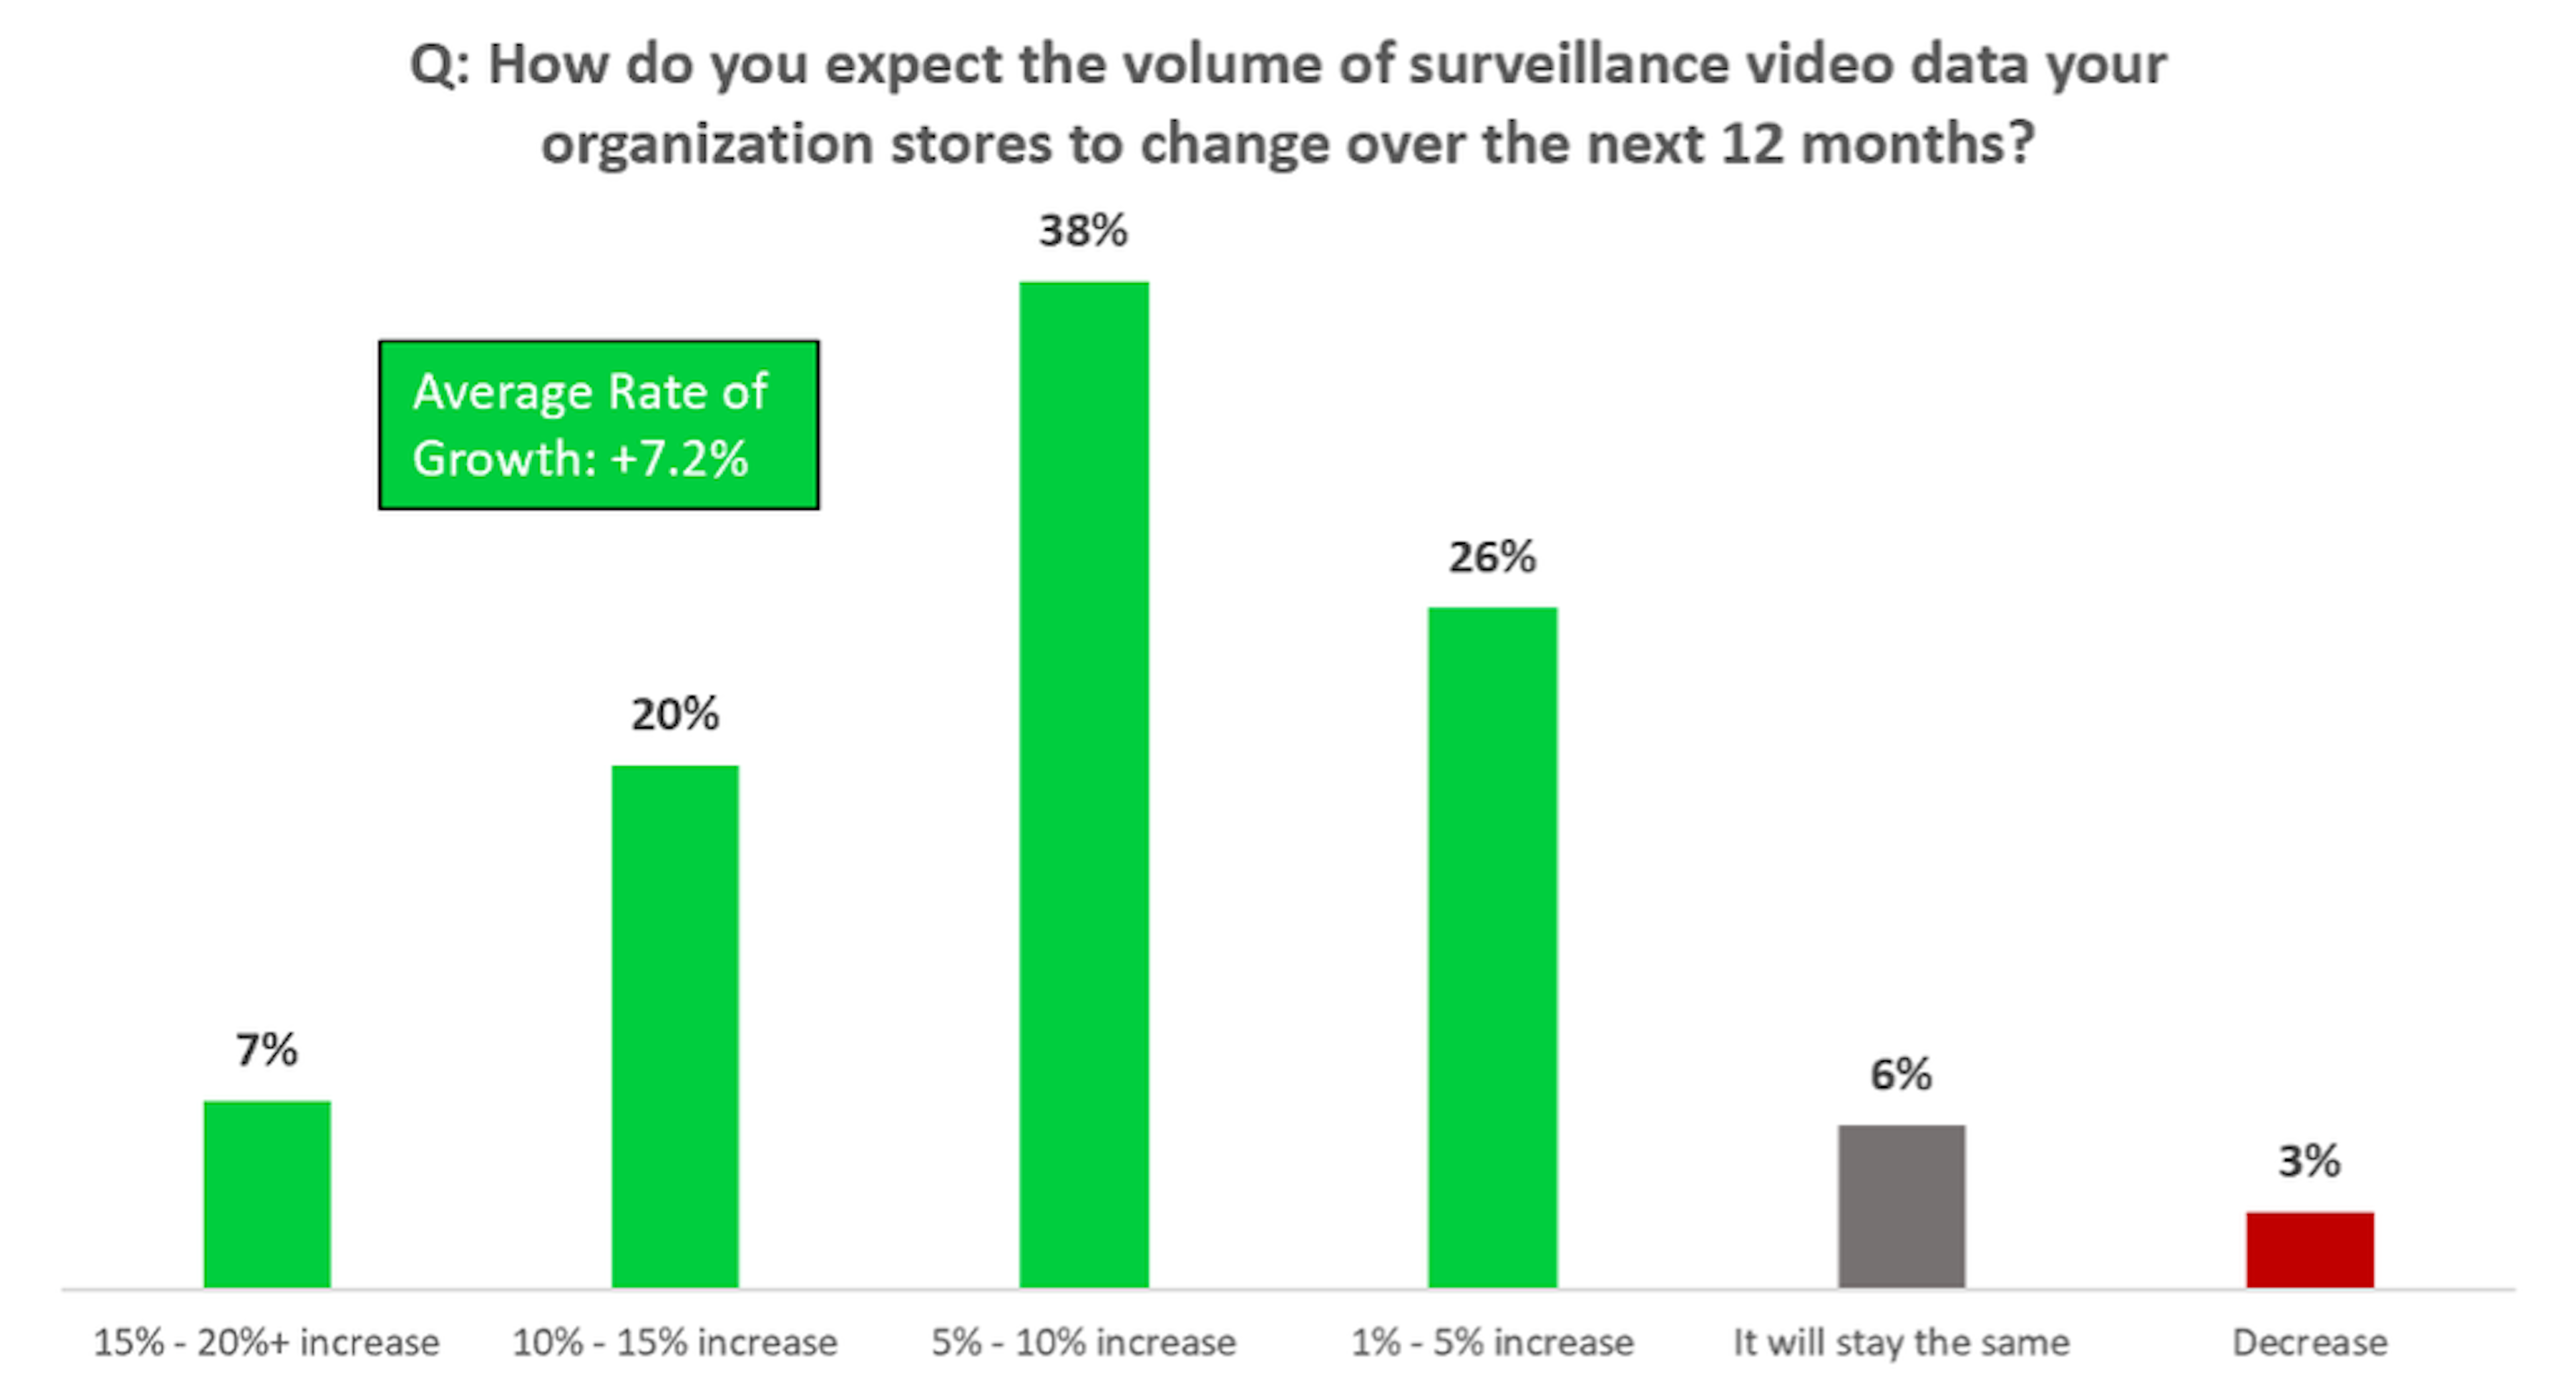 bar graph showing how customers expect volume of surveillance data will change over 12 months